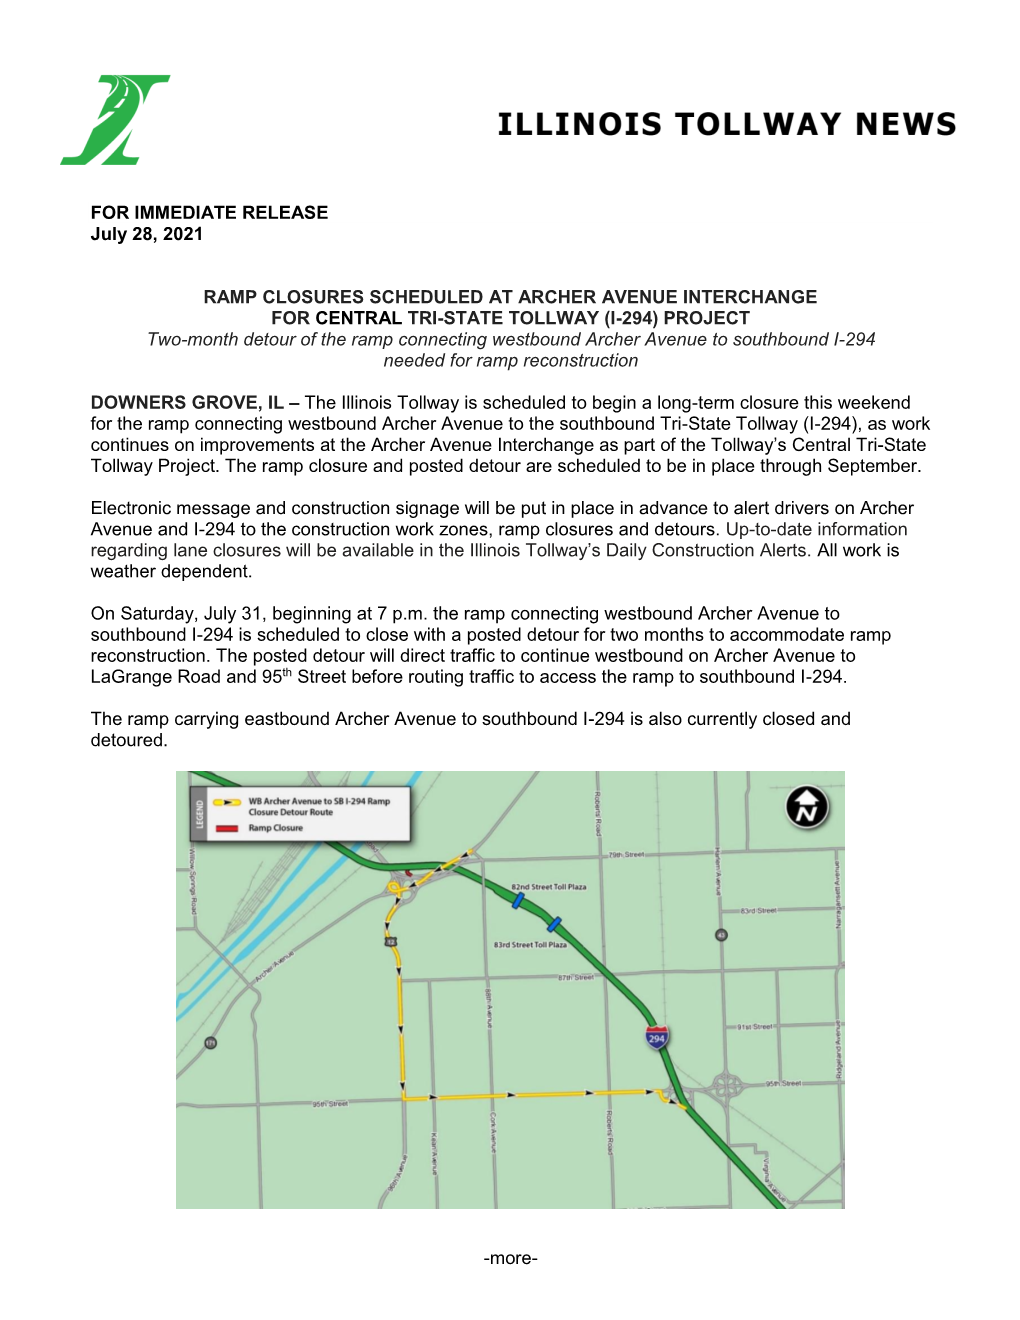 More- for IMMEDIATE RELEASE July 28, 2021 RAMP CLOSURES SCHEDULED at ARCHER AVENUE INTERCHANGE for CENTRAL TRI-STATE TOLLWAY